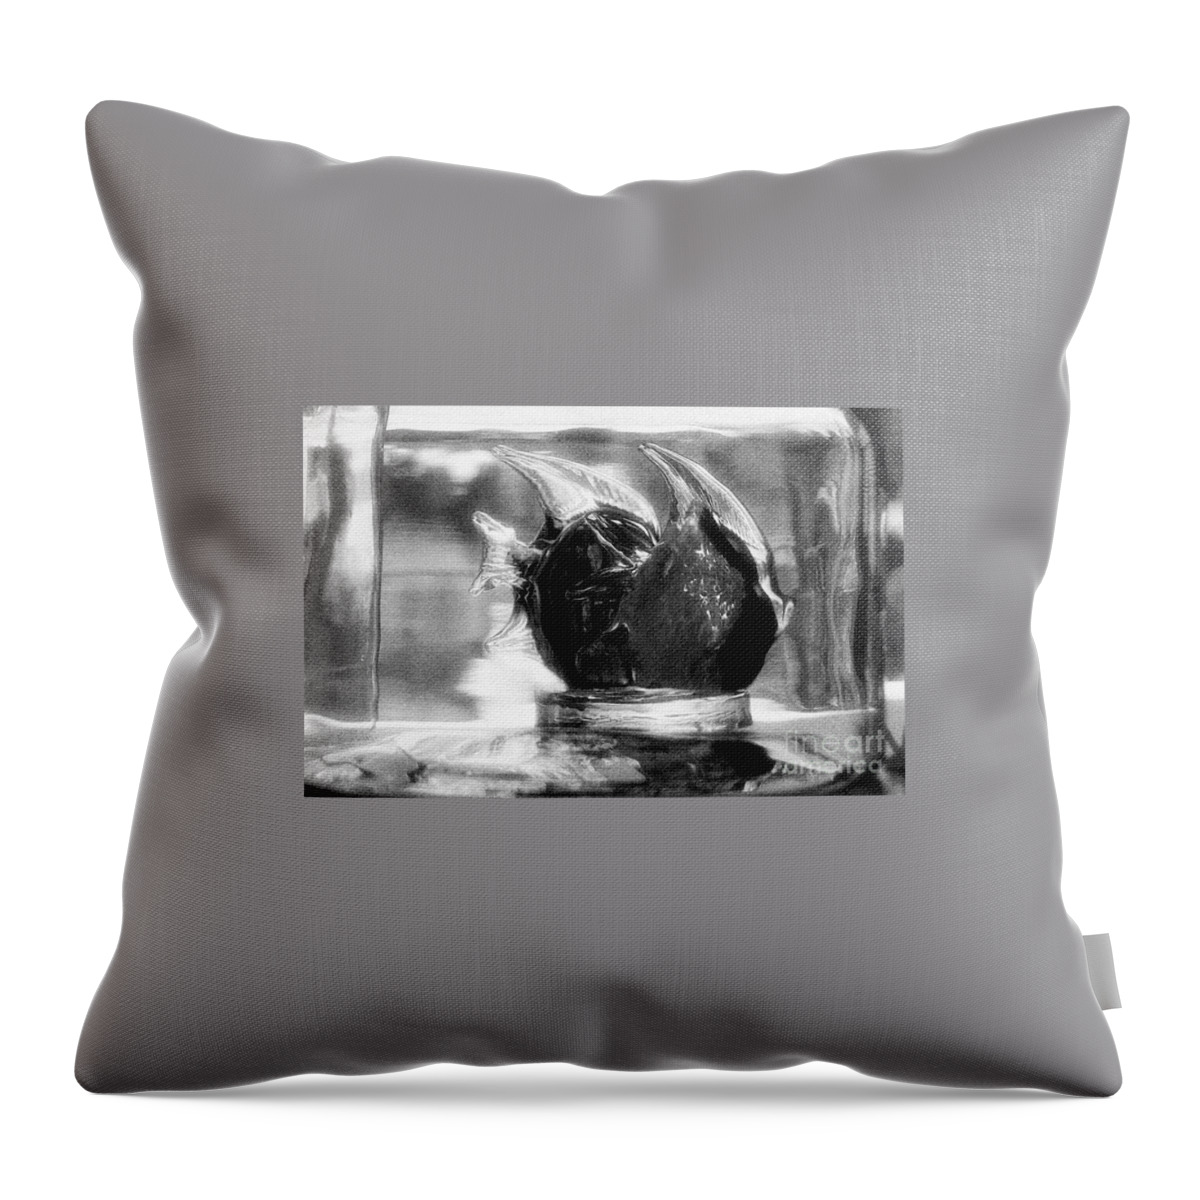 Fish Throw Pillow featuring the photograph Bottled Up by Eileen Gayle